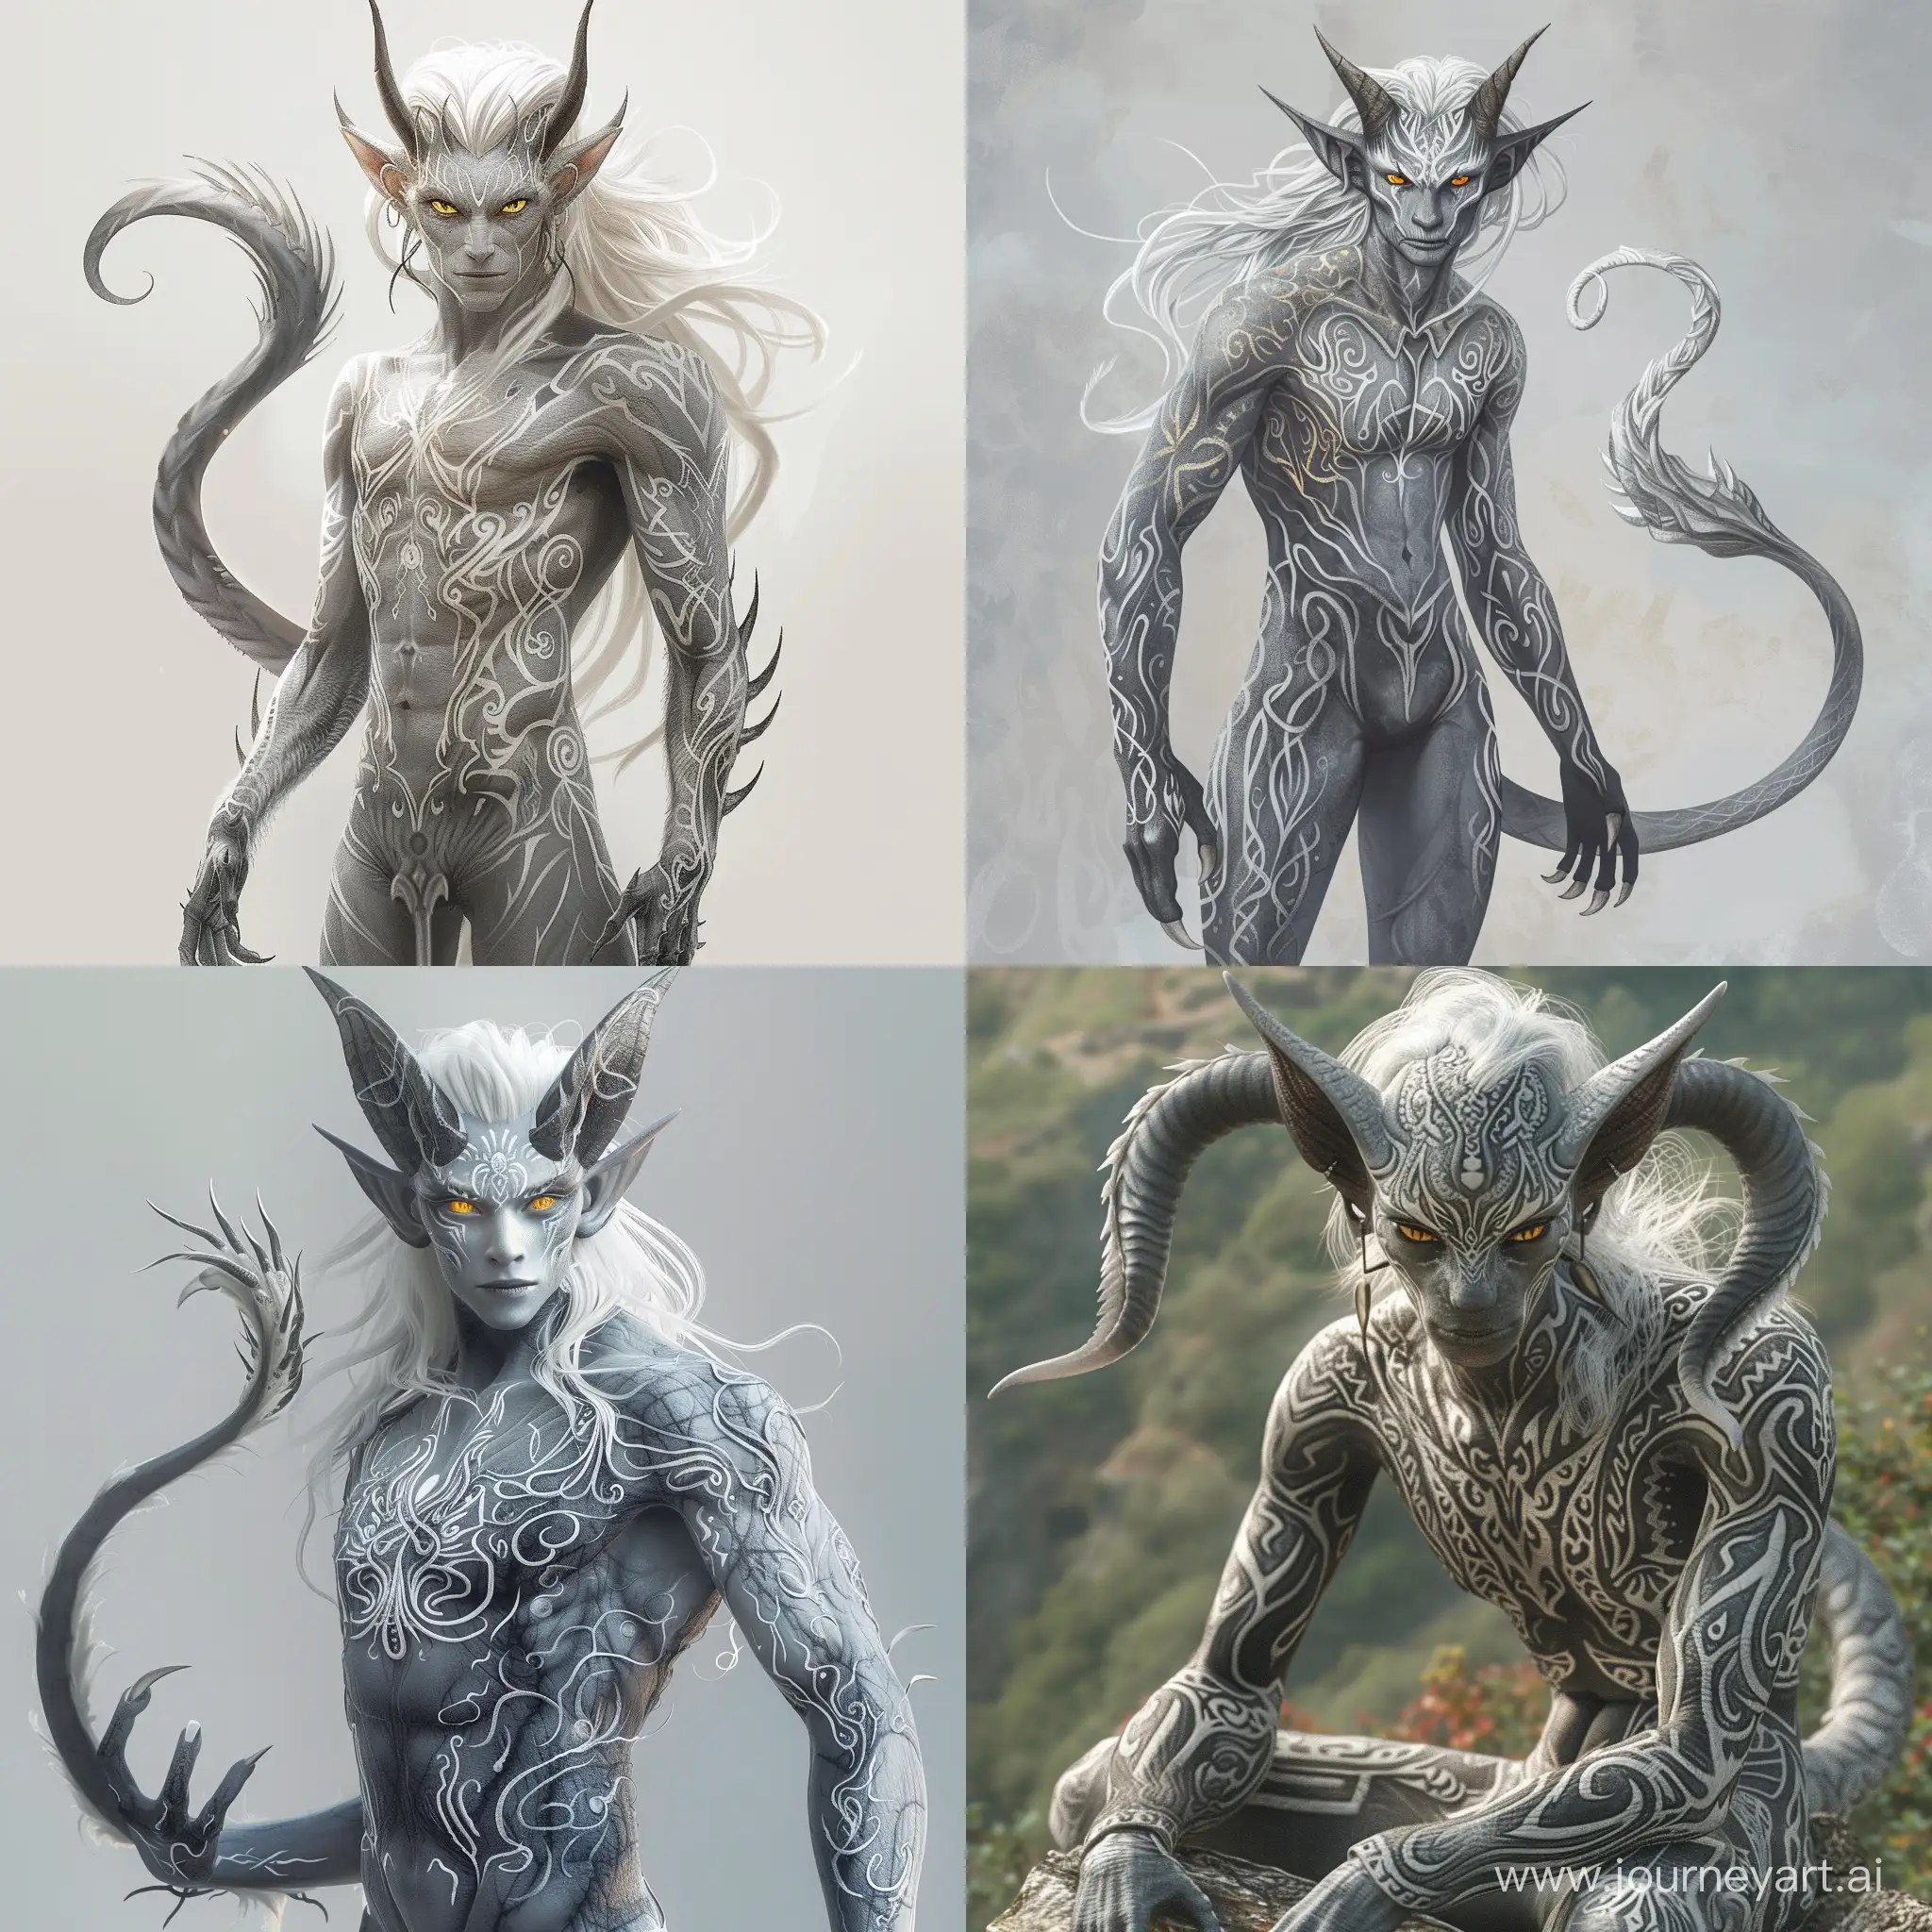 Ethereal-Grey-Entity-with-Intricate-Markings-and-Curved-Horns